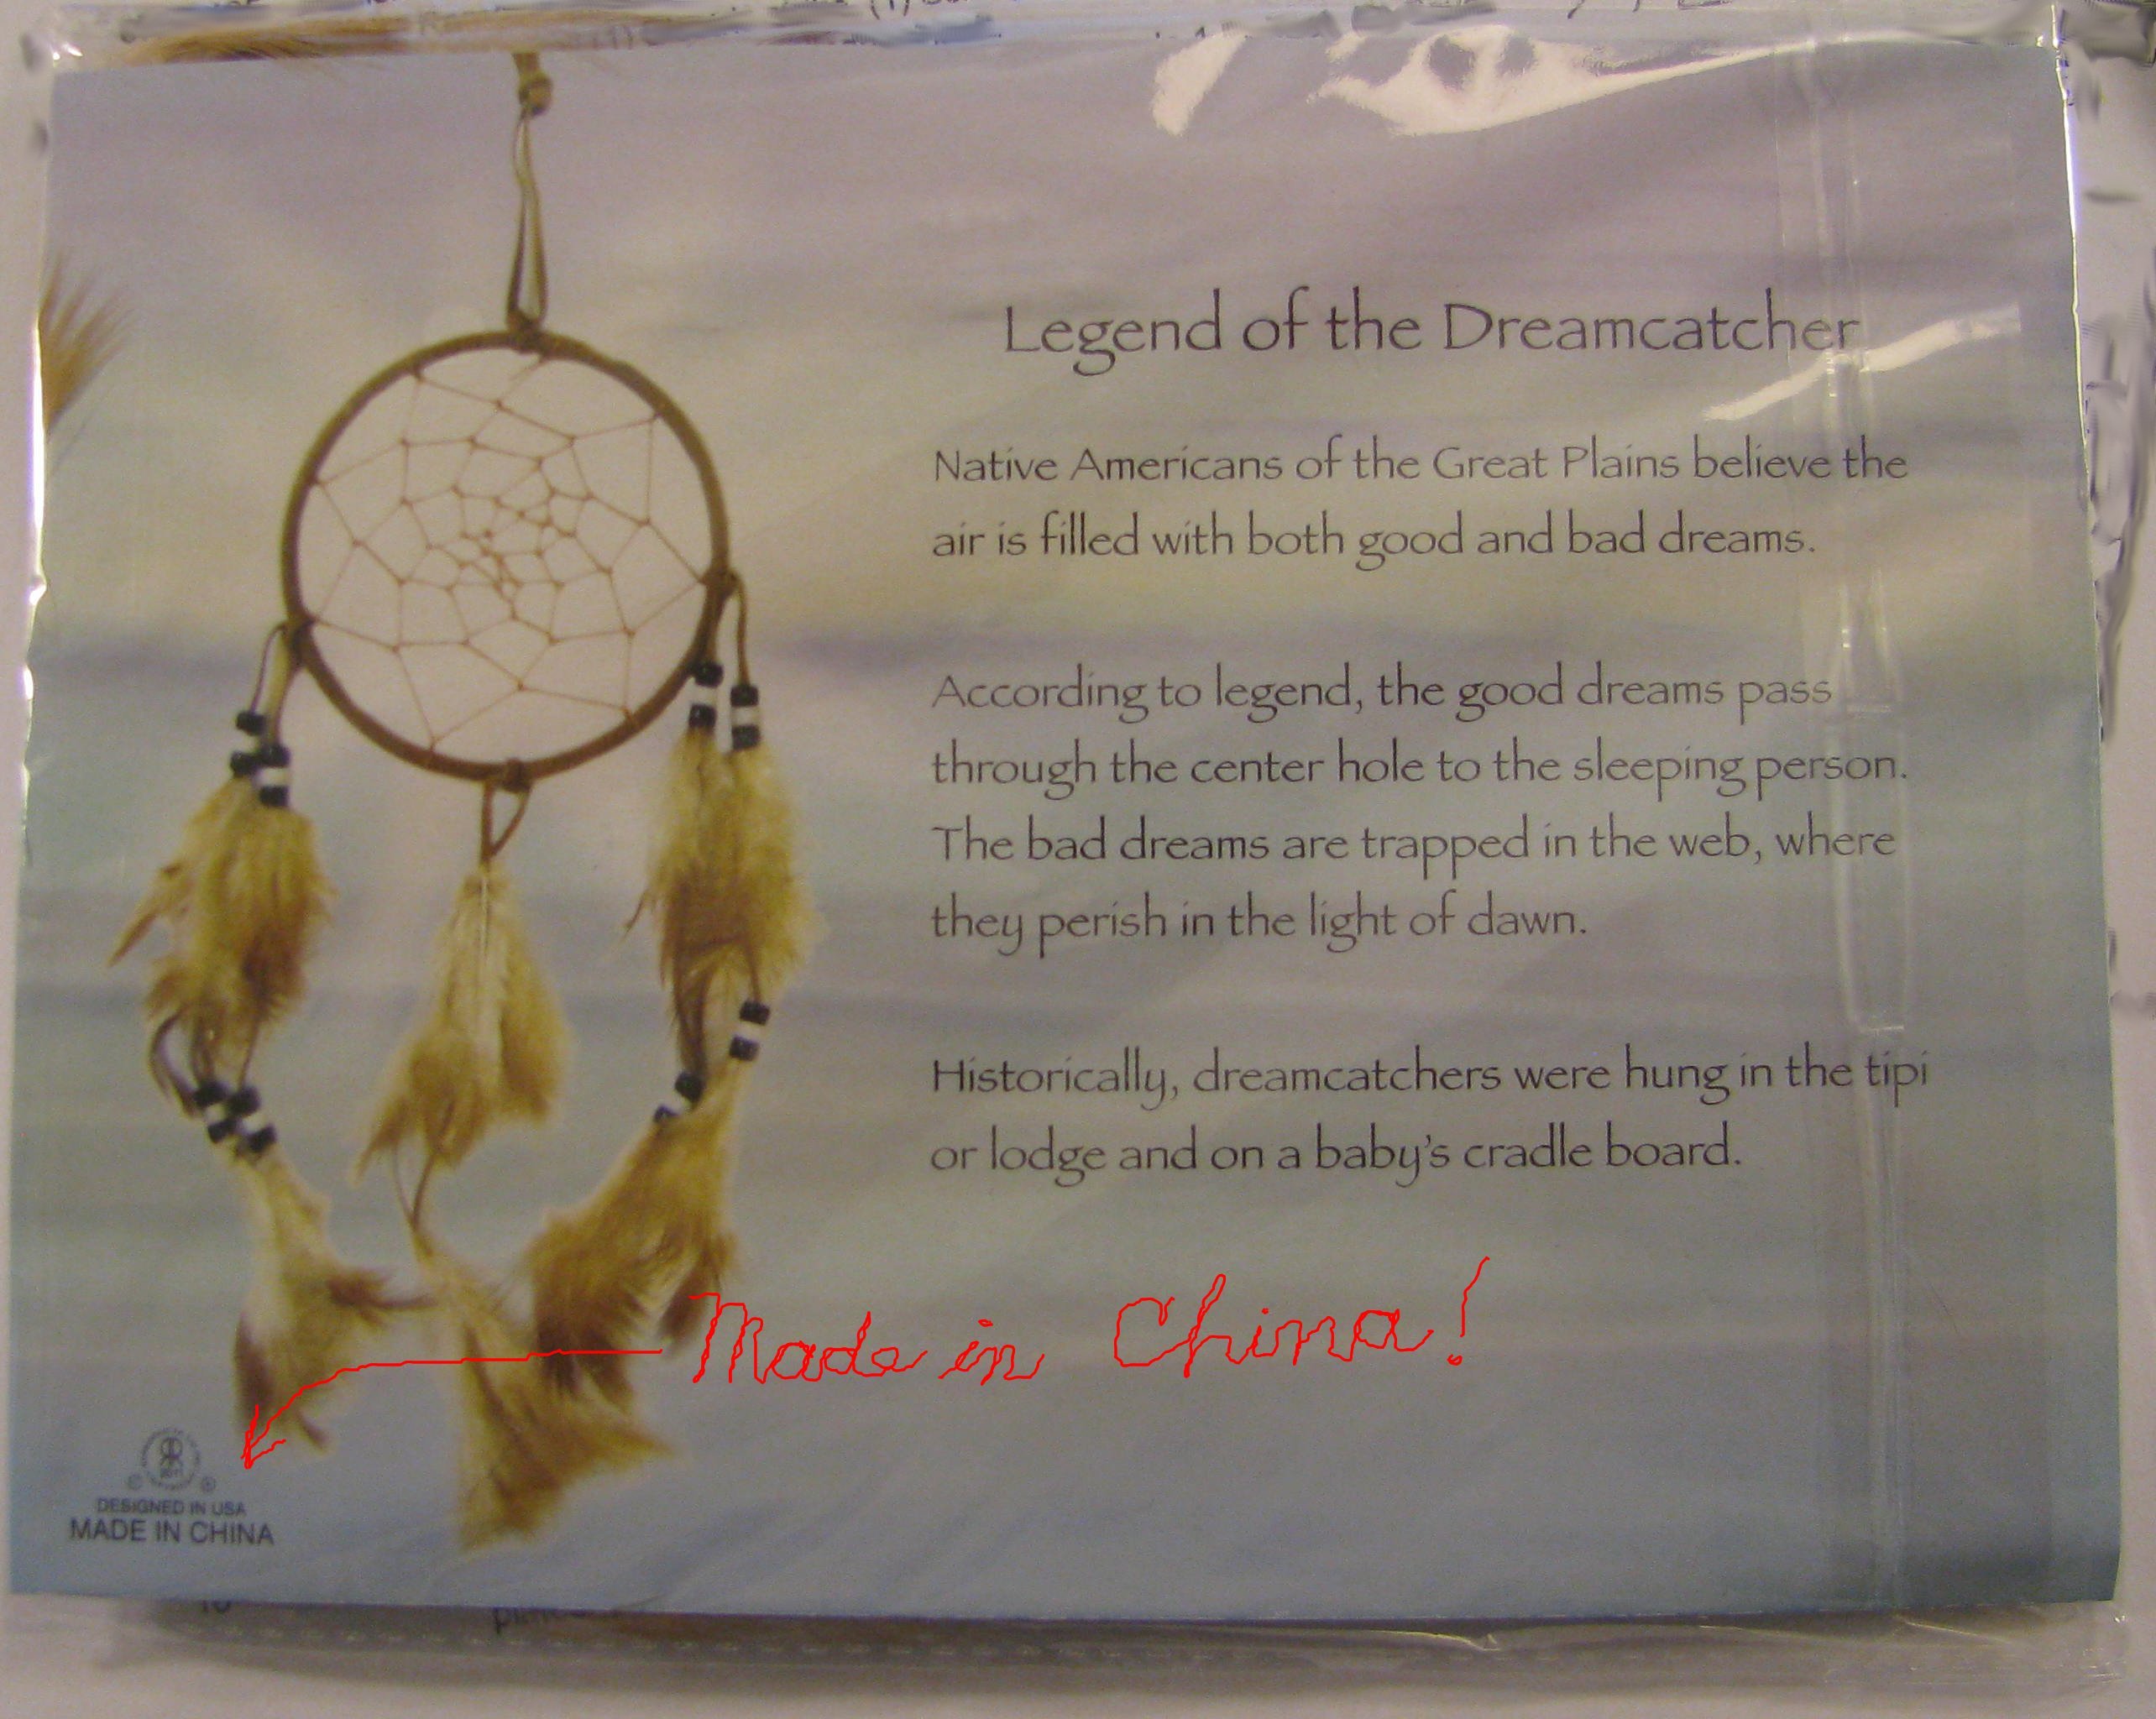 Dream Catcher Quotes And Sayings. QuotesGram